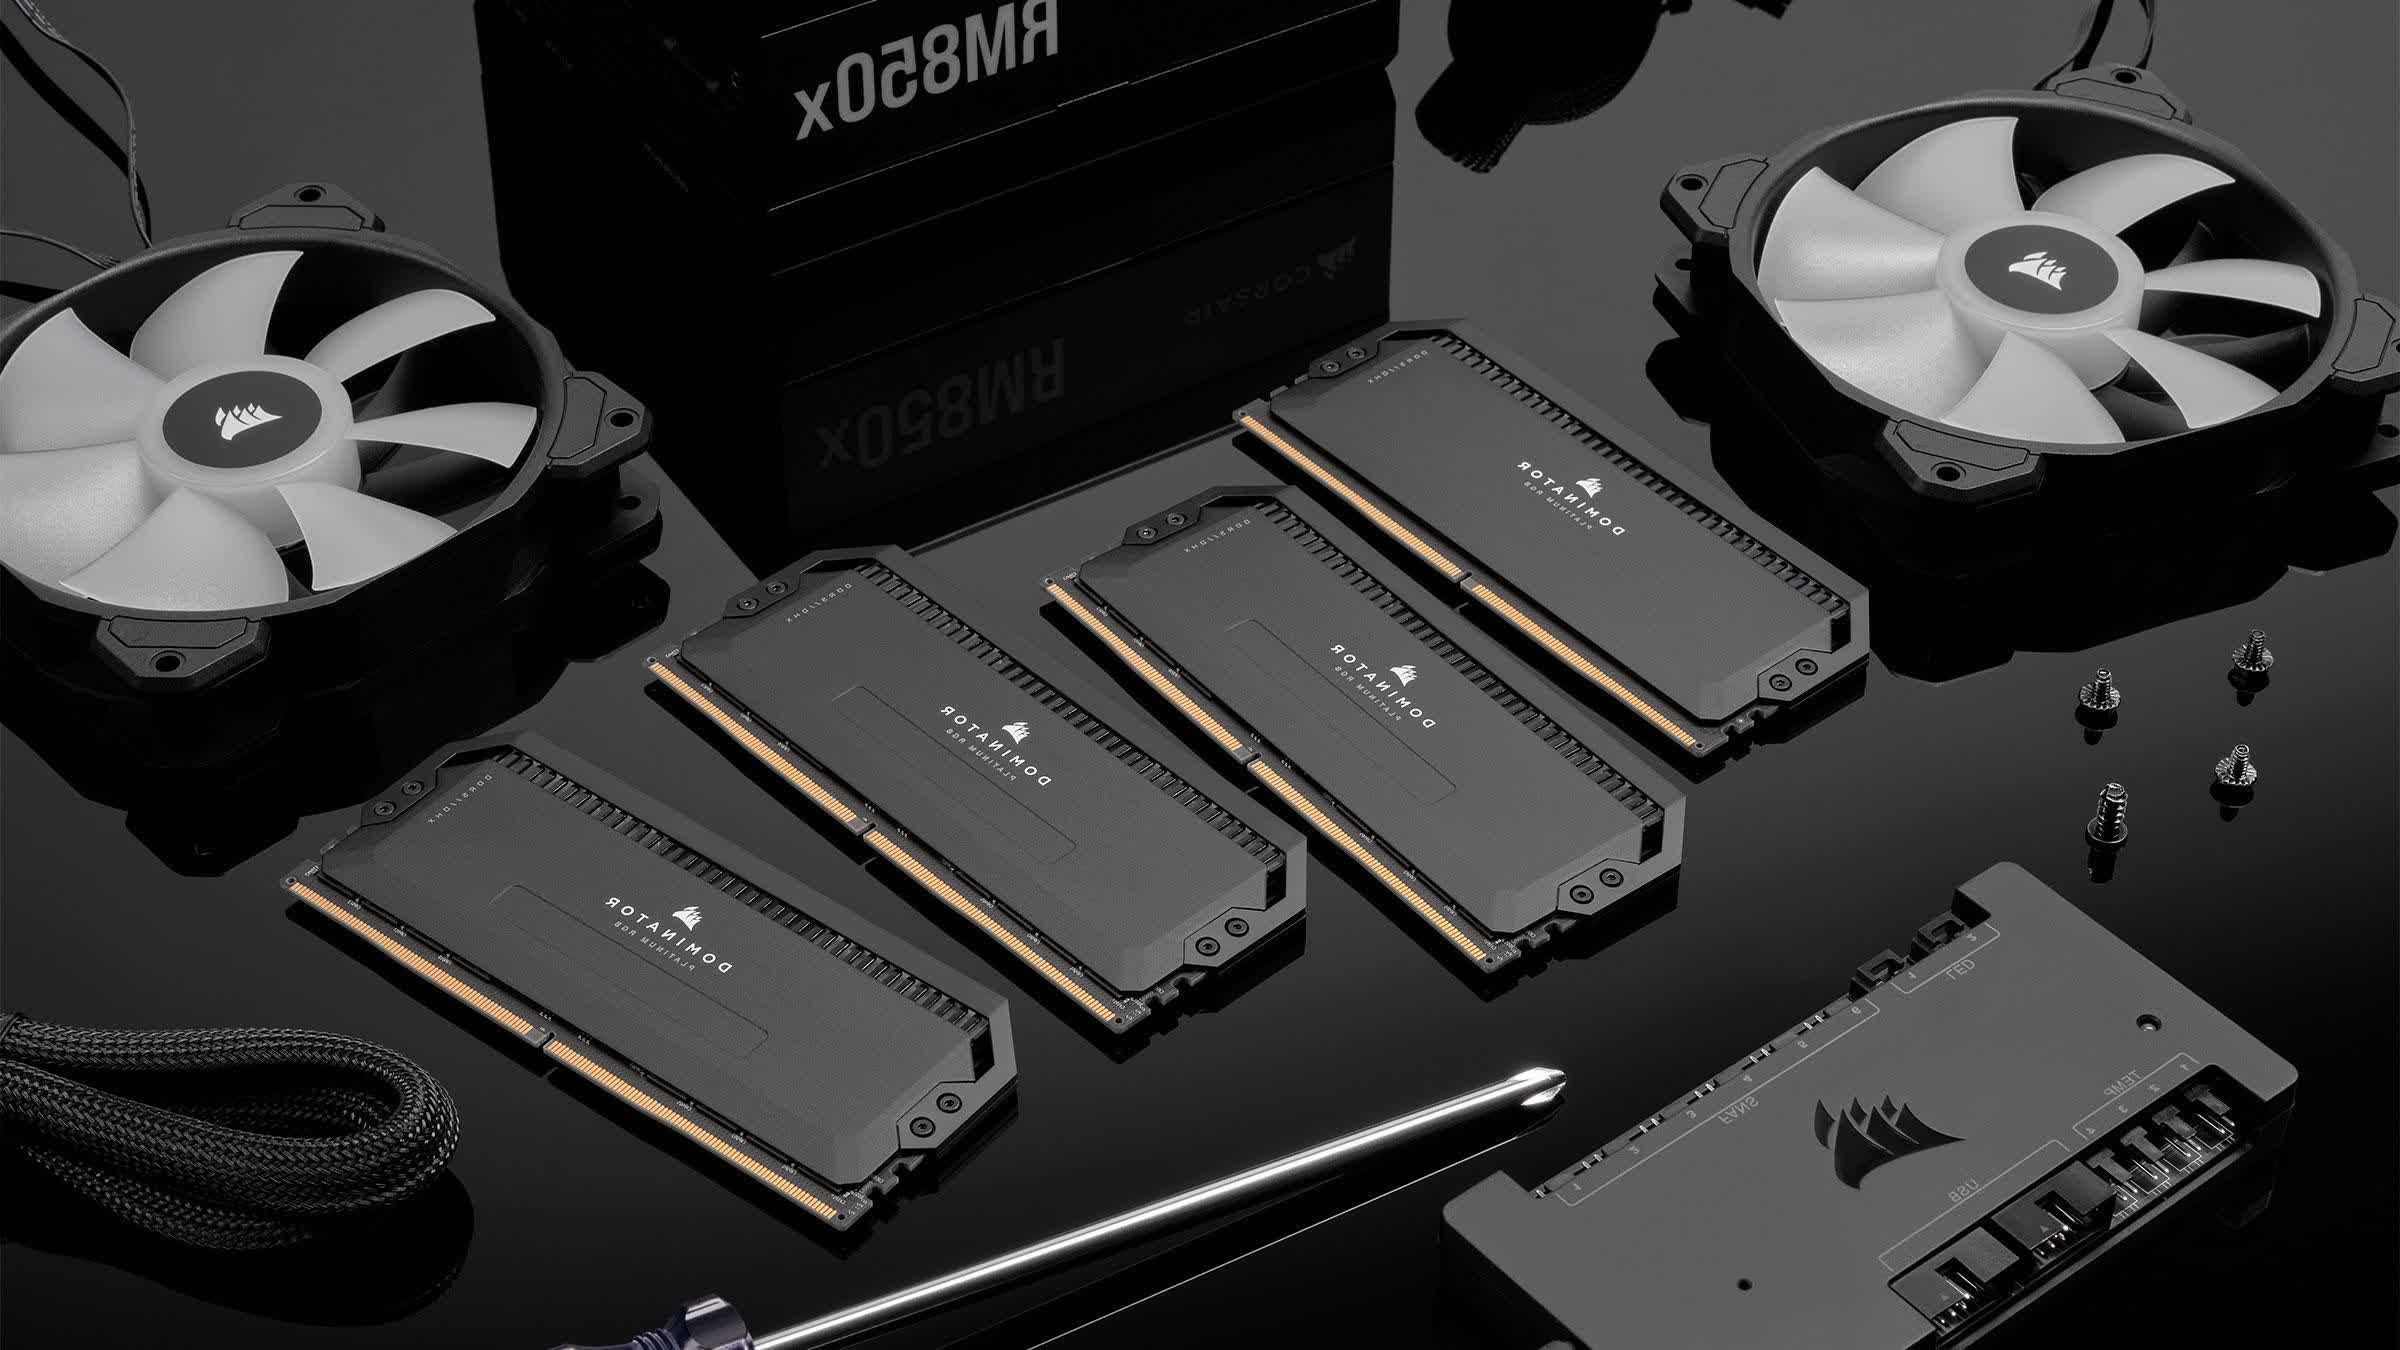 DDR5 memory kits reach $400, and most have sold out